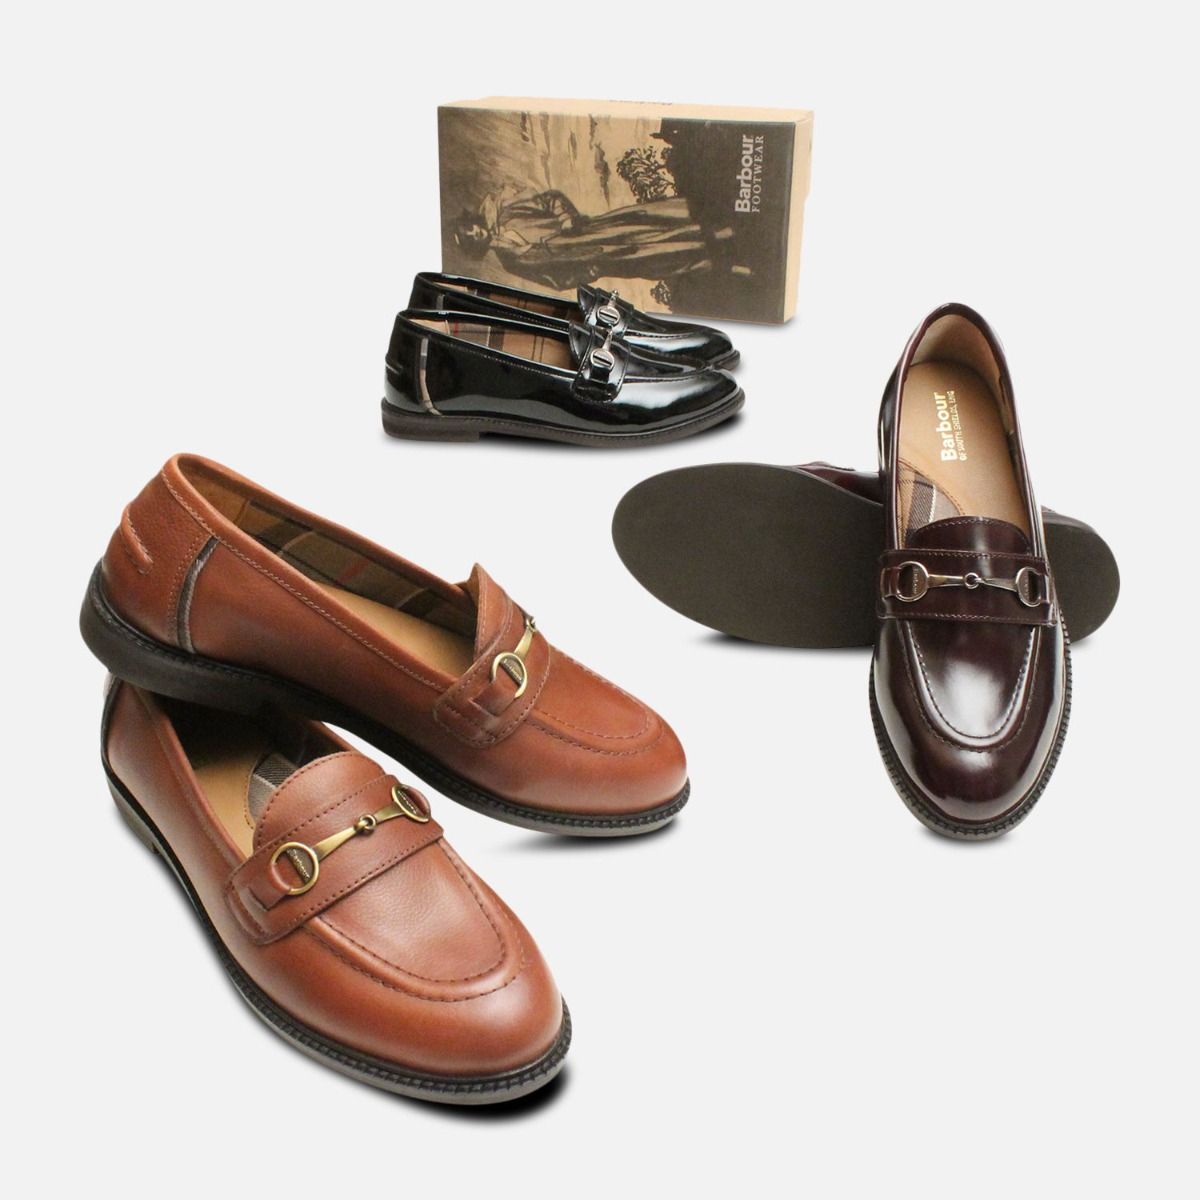 barbour loafers sale